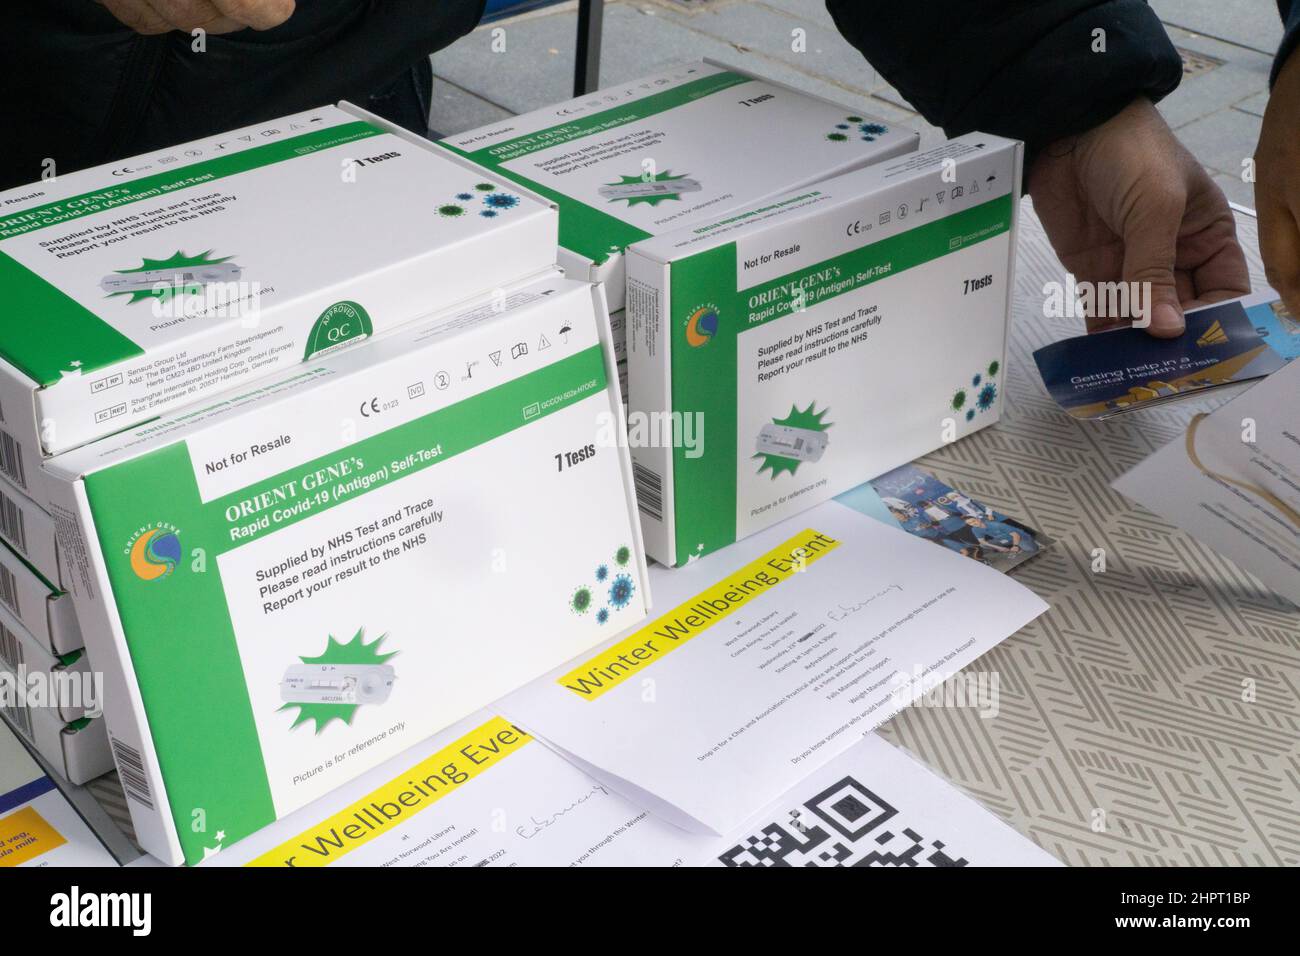 London, UK, 23 Feb 2022: A stack of lateral flow tests which are being given out to Lambeth residents at a pop-up vaccination and testing site opposite Brixton tube station. Since Boris Johnson announced that free testing will end on 1 April there has been high demand and test were temporarily unavailable to order online. Anna Watson/Alamy Live News Stock Photo